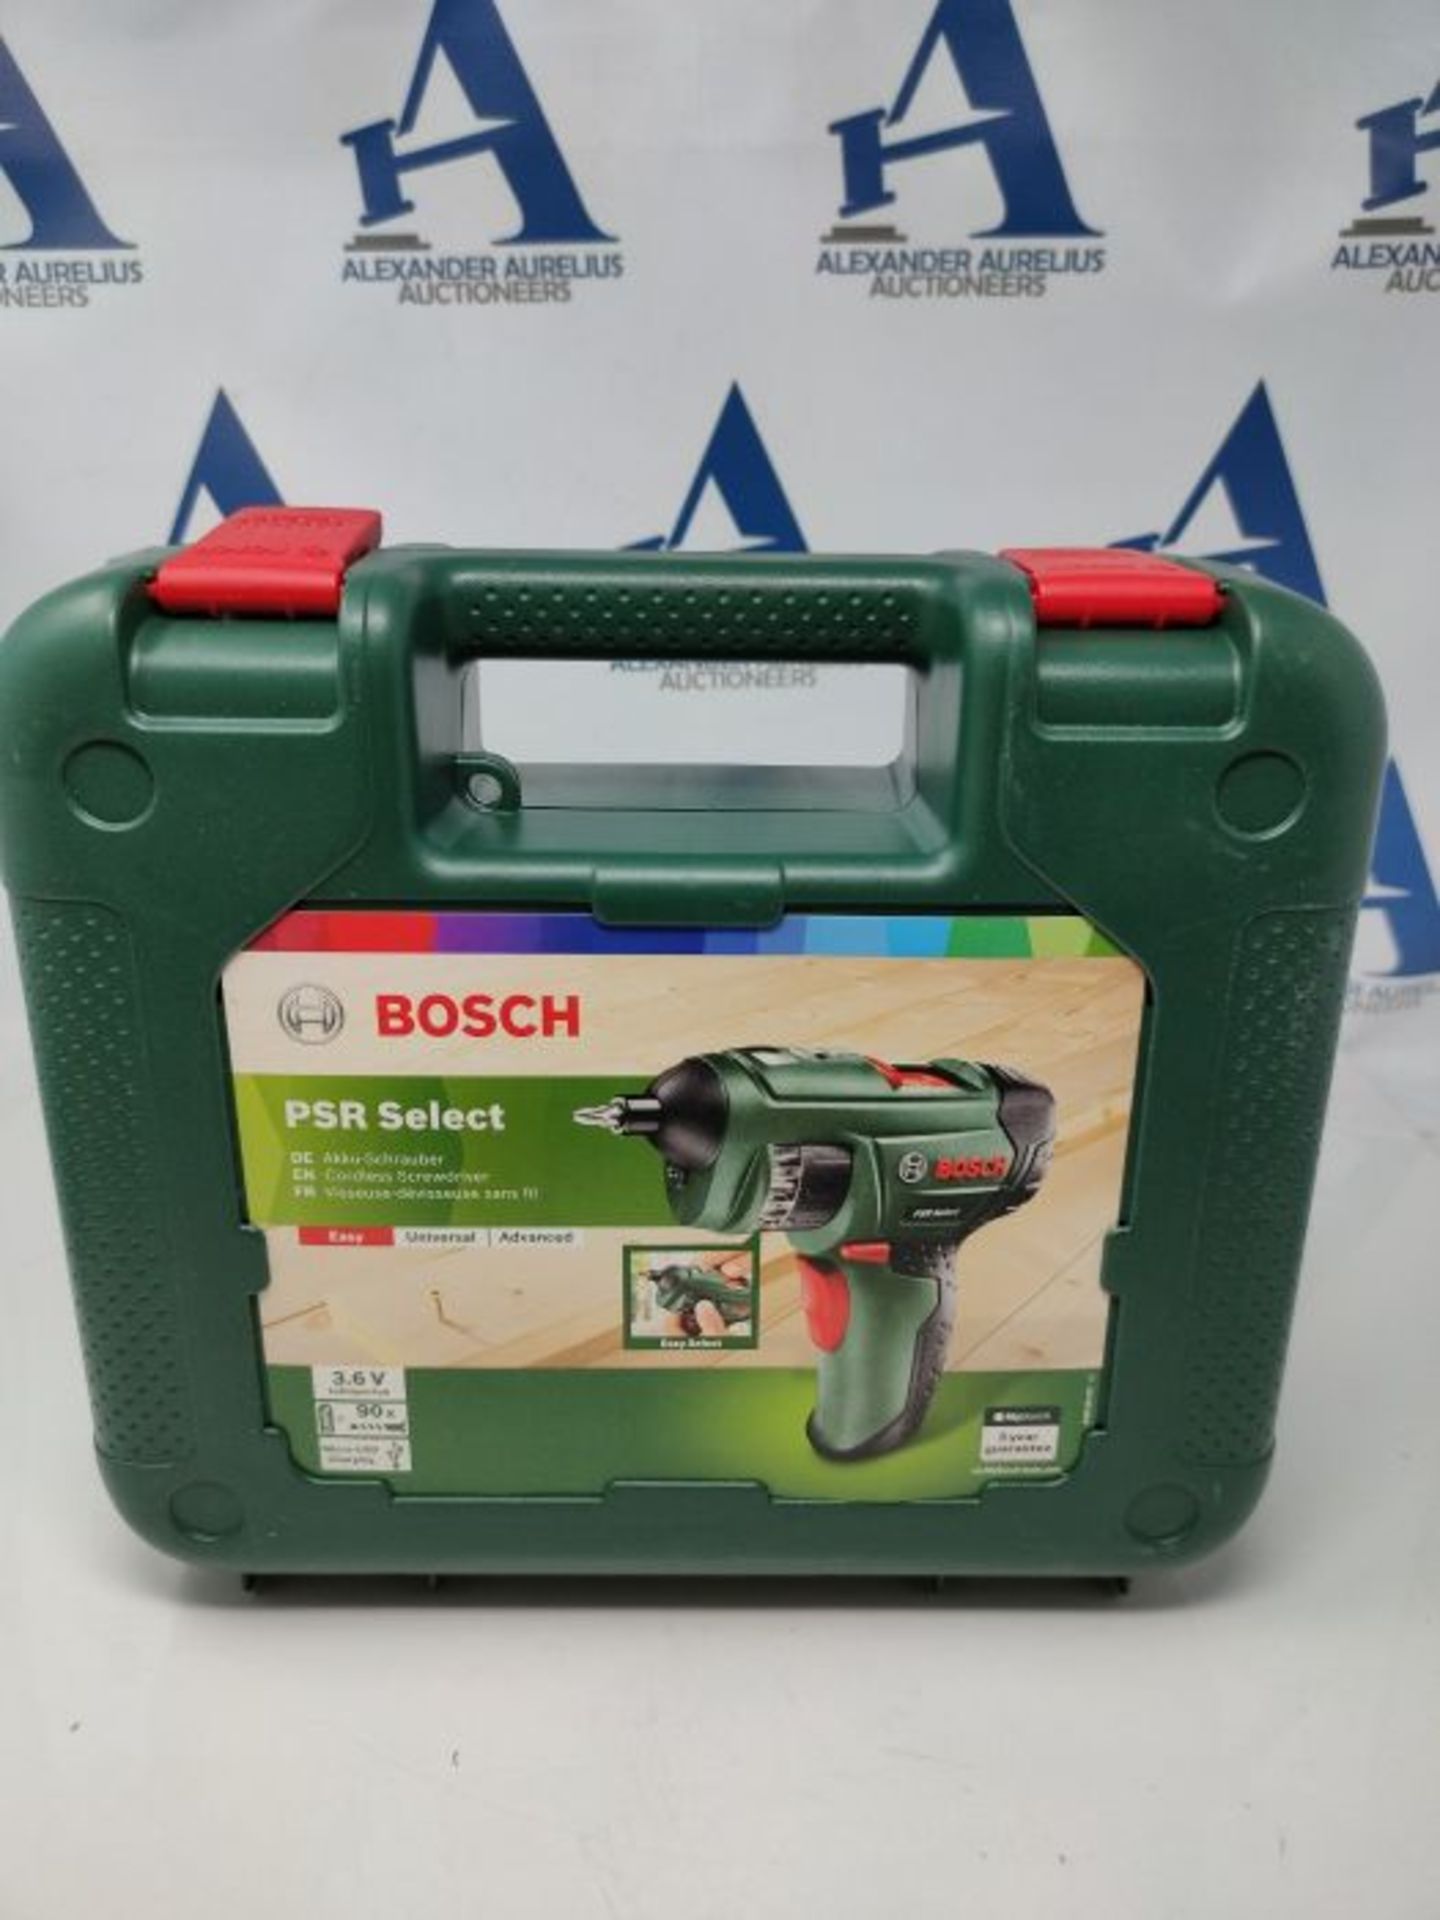 Bosch Home and Garden Cordless Screwdriver PSR Select (with Integrated 3.6 V Lithium-I